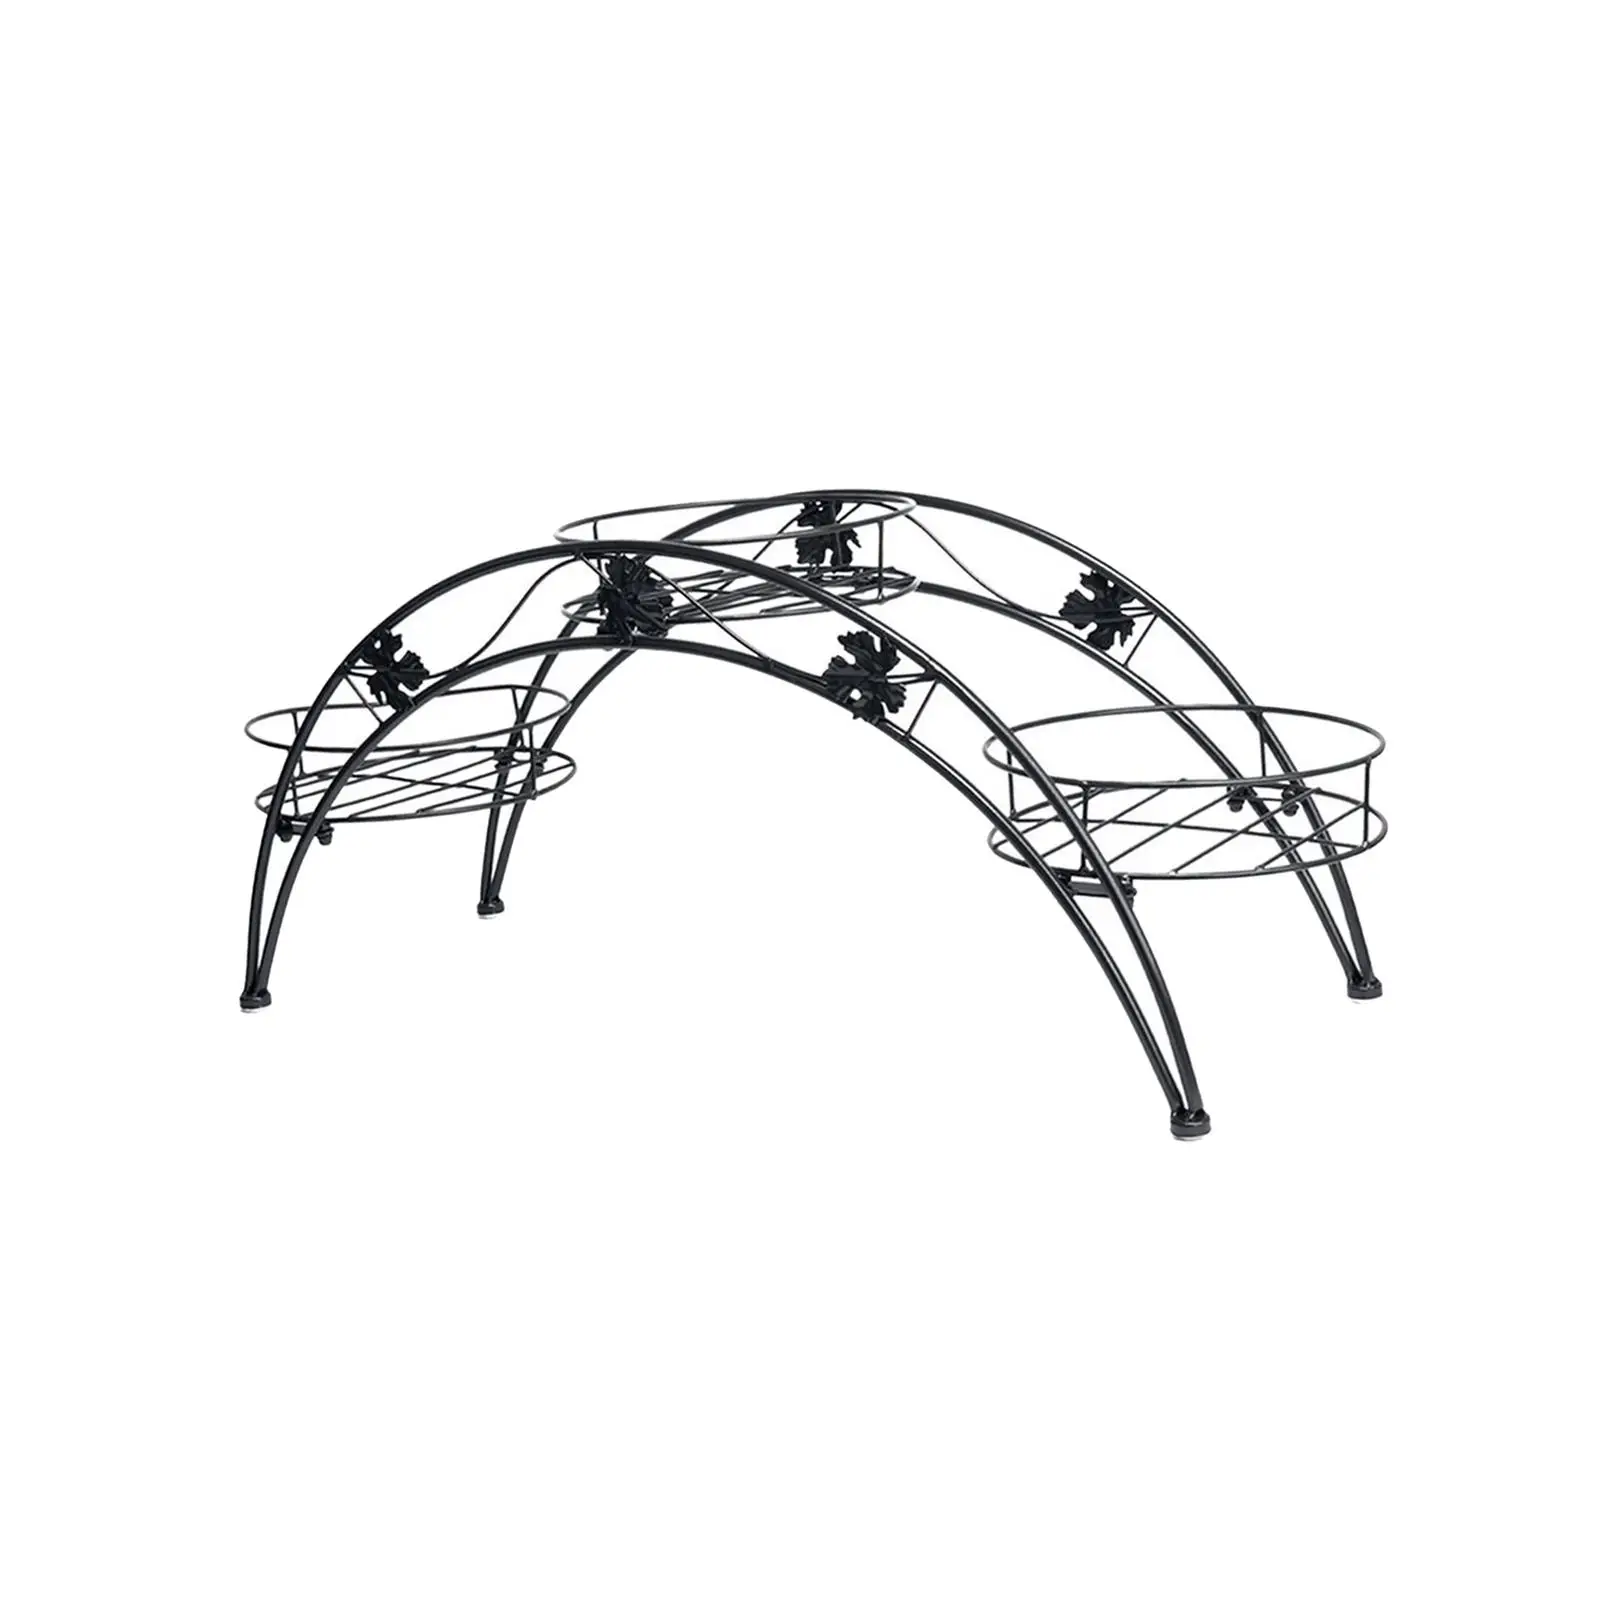 Potted Holder Arch Shaped for Garden Decorative Round Support Flower Pot Stand Shelf Iron Art Planter Stand Flower Pot Stand